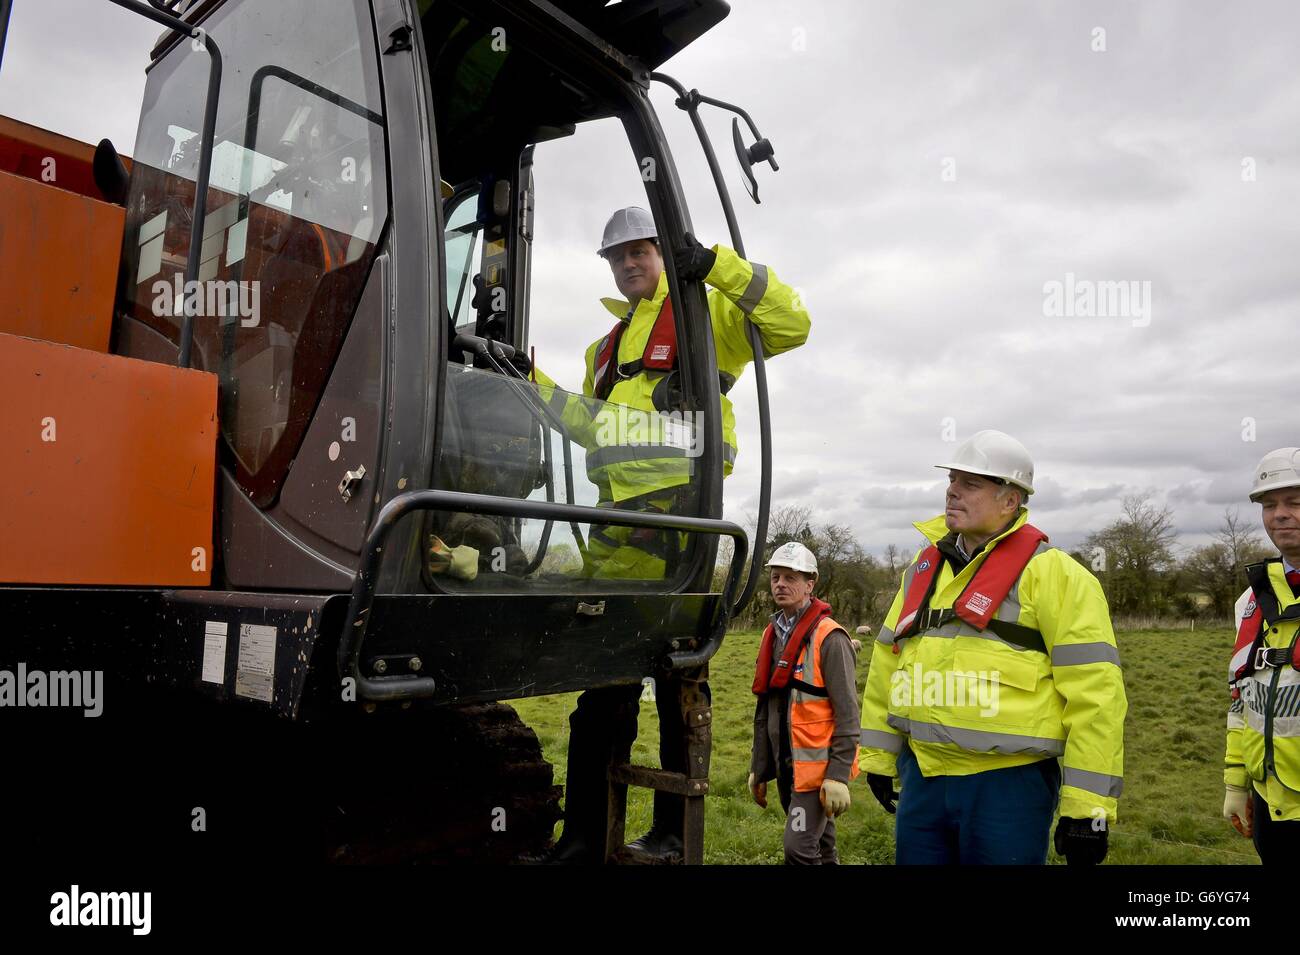 Prime Minister David Cameron climbs up to the cab of an excavator as he is shown the dredging operation on site at the River Parrett, near Burrowbridge, Somerset, where repair and recovery from the floods earlier in 2014 are taking place. Stock Photo